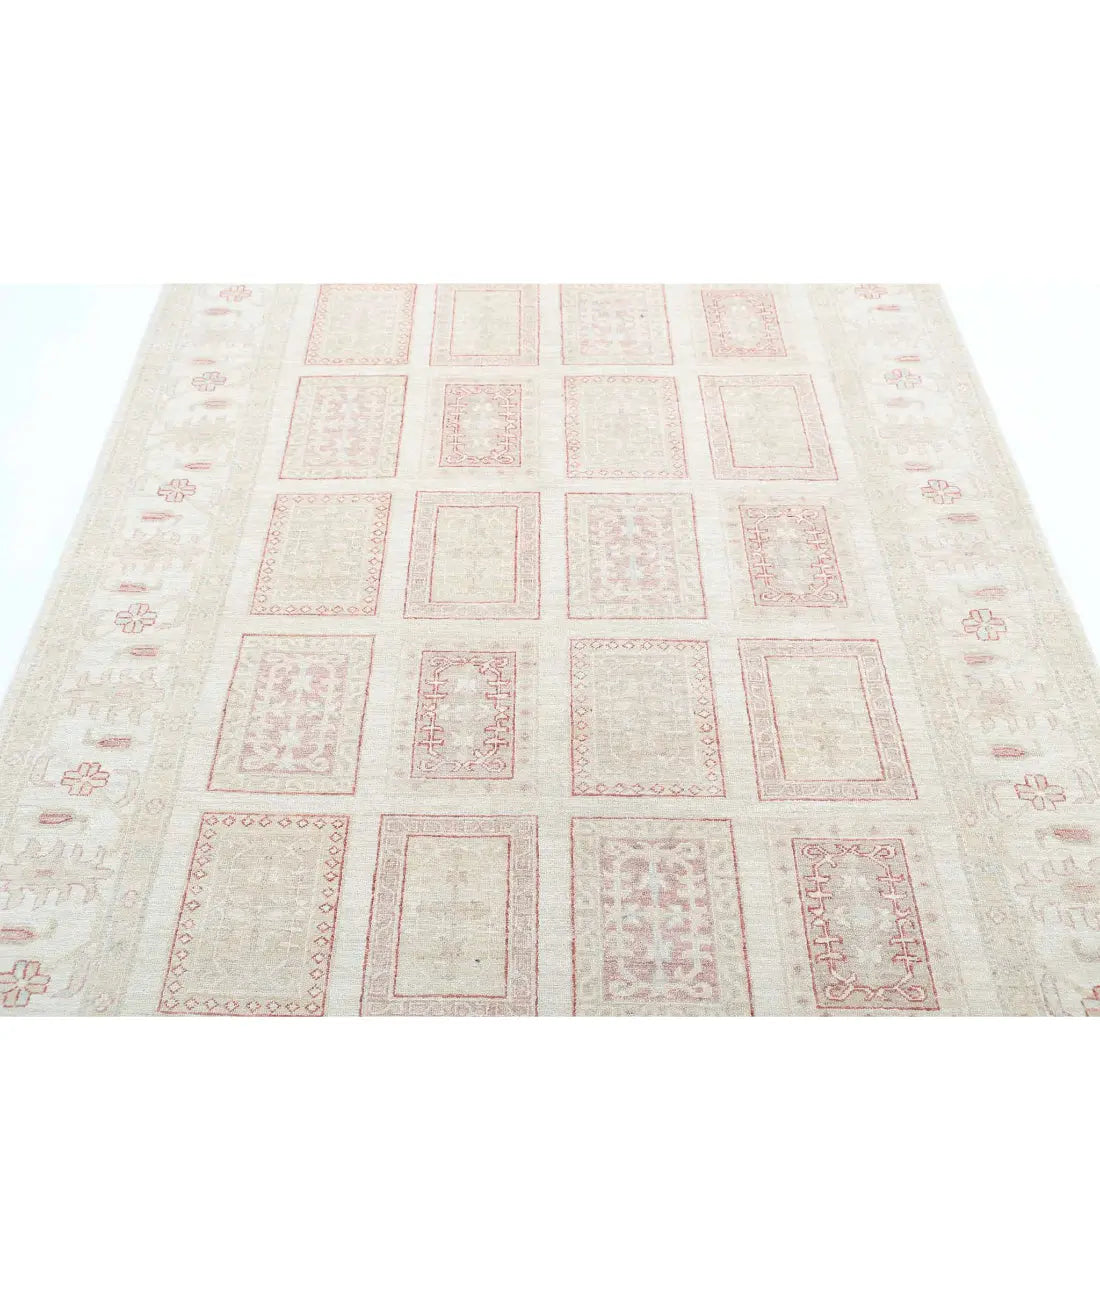 Hand Knotted Serenity Wool Rug - 5'6'' x 7'1''